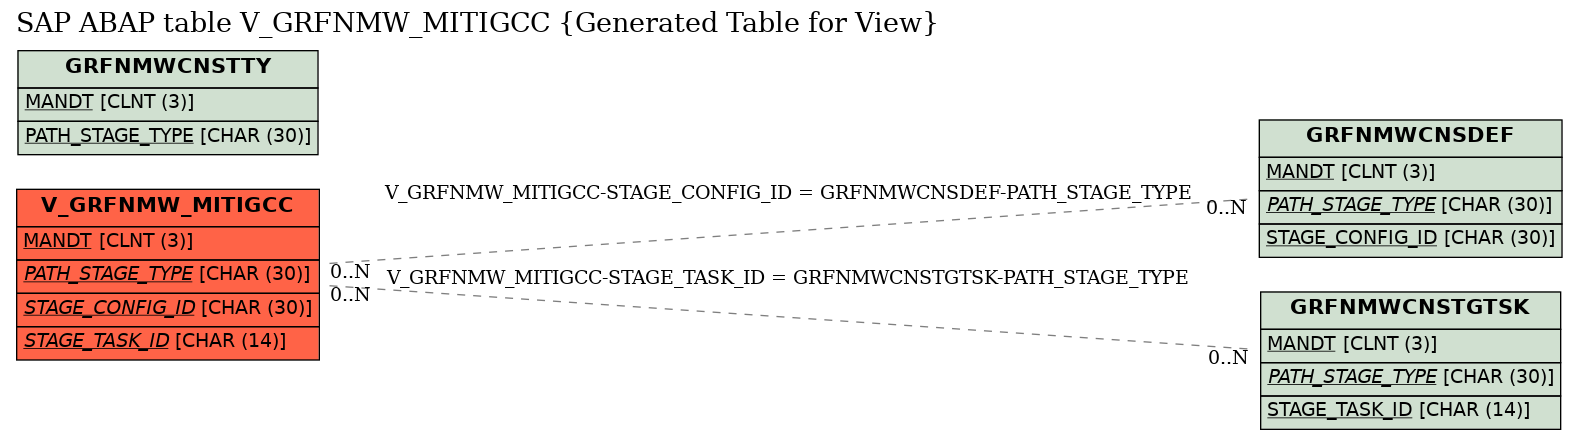 E-R Diagram for table V_GRFNMW_MITIGCC (Generated Table for View)